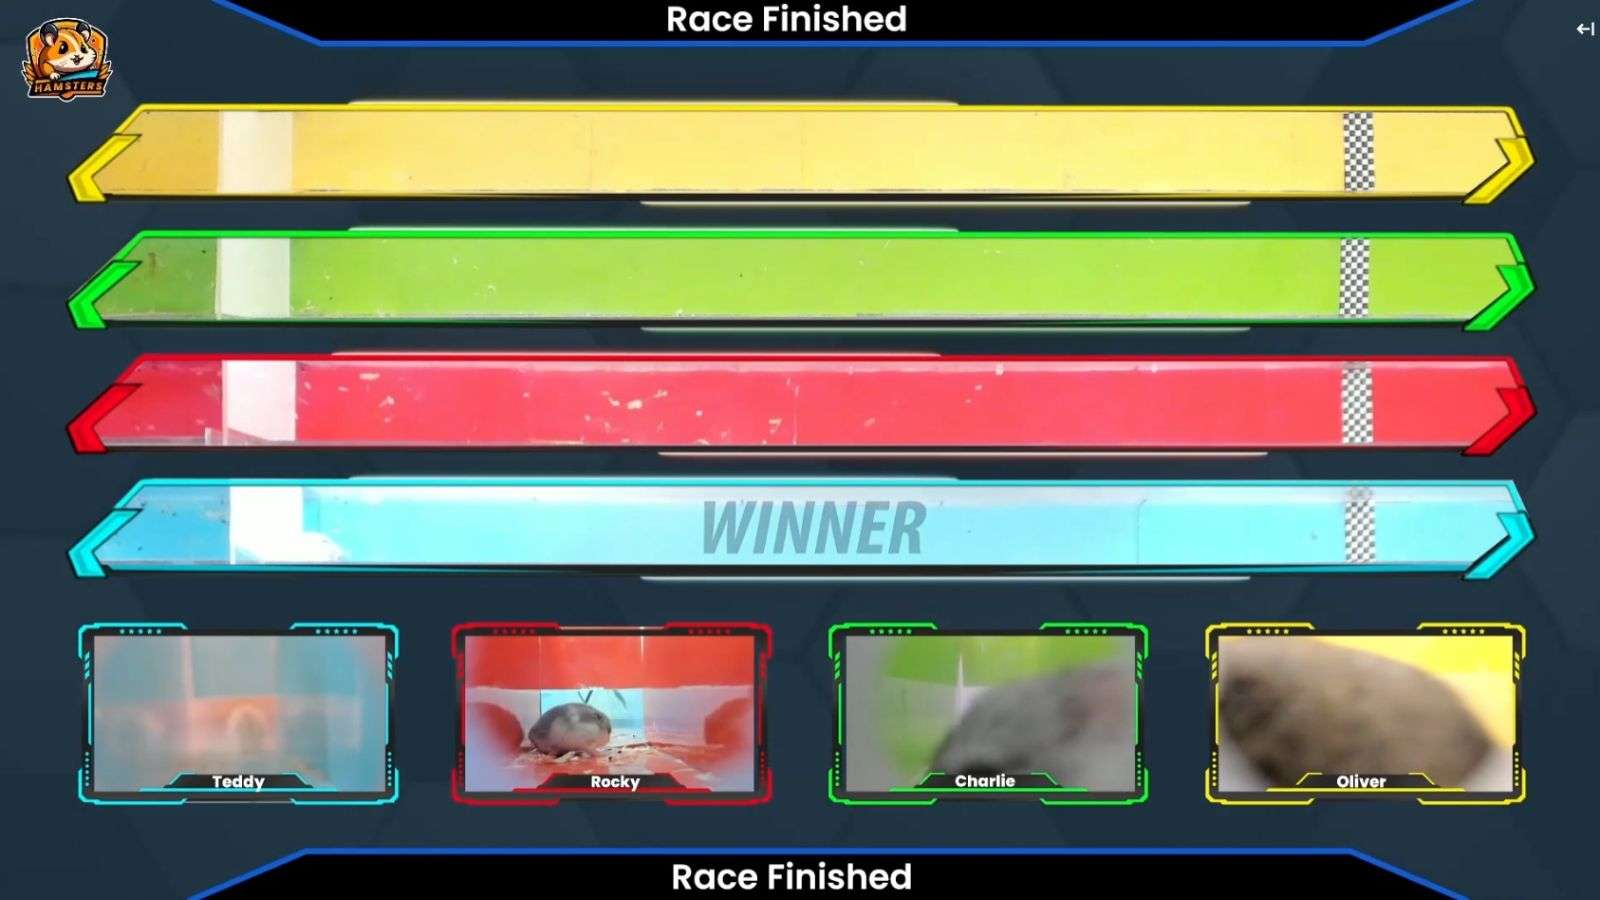 Hamster race betting on Twitch